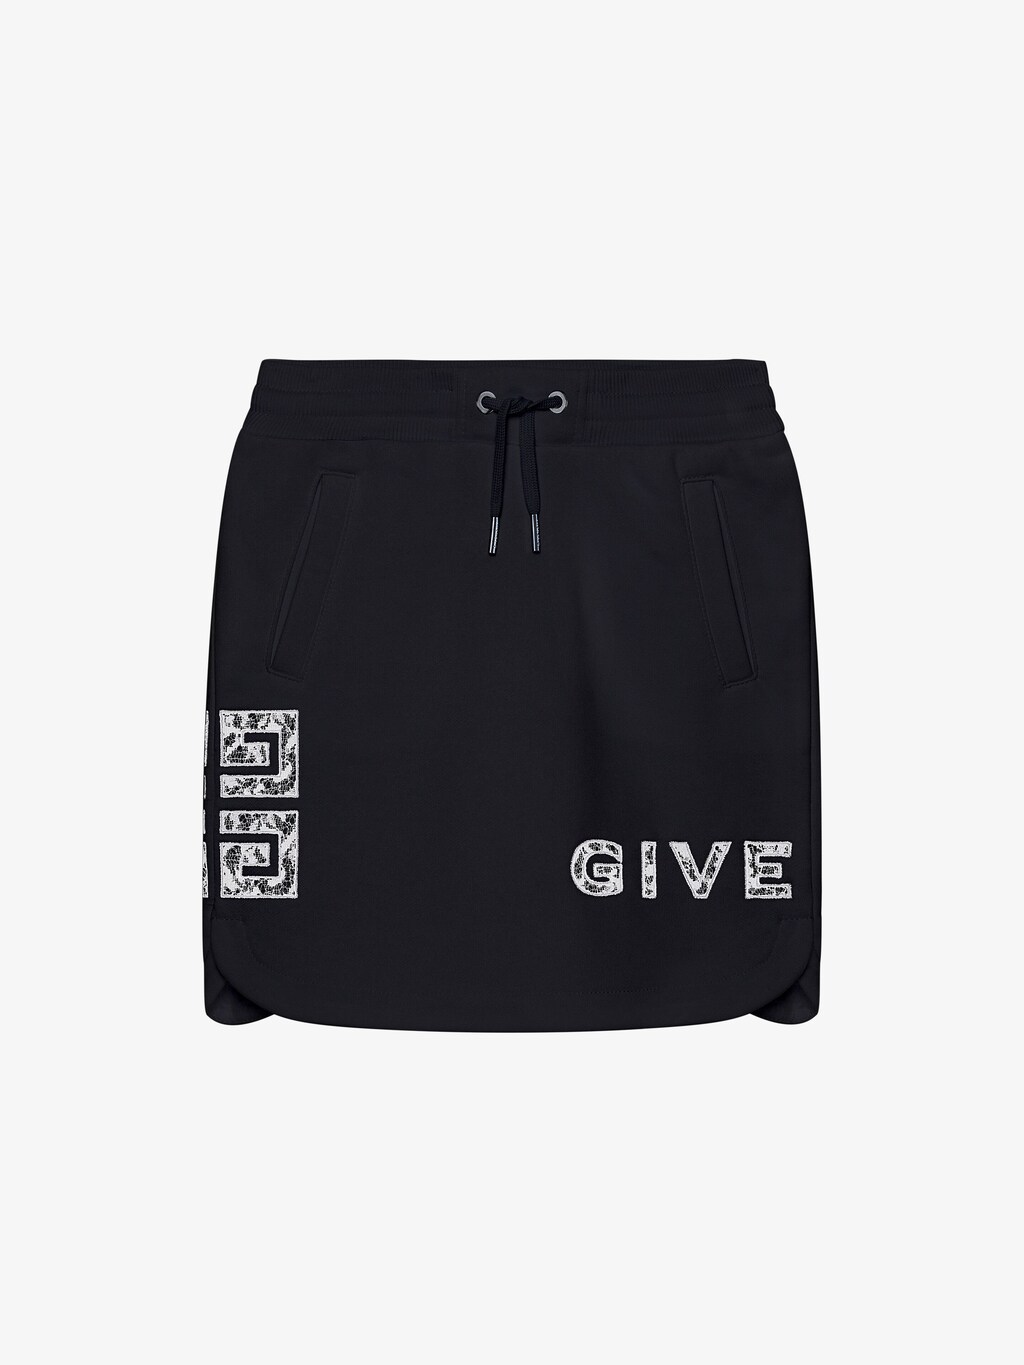 undefined | Skirt in duffle with GIVENCHY 4G embroidery